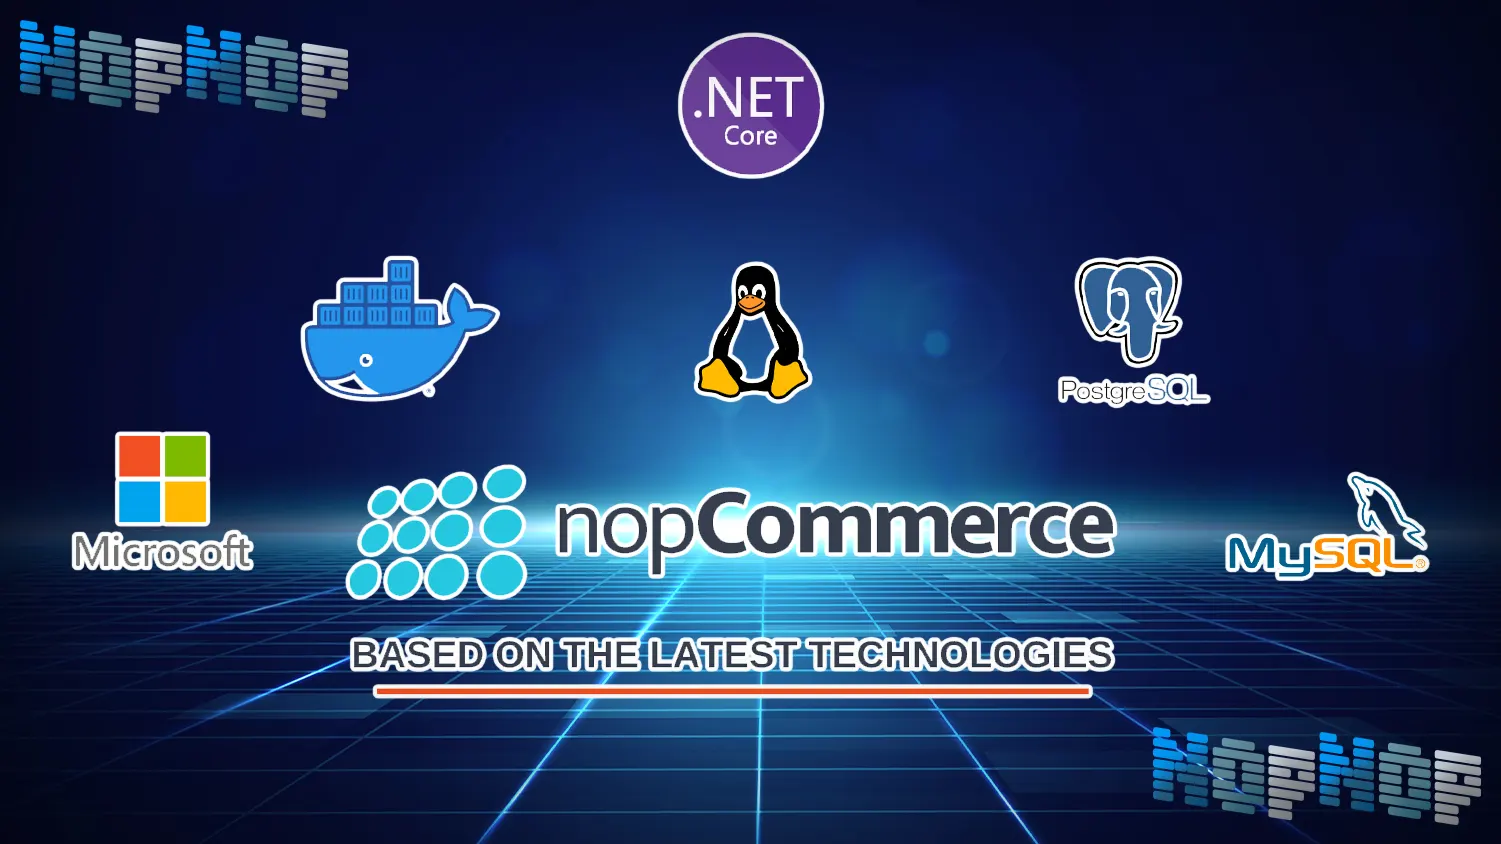 What are the features of Nopcommerce?